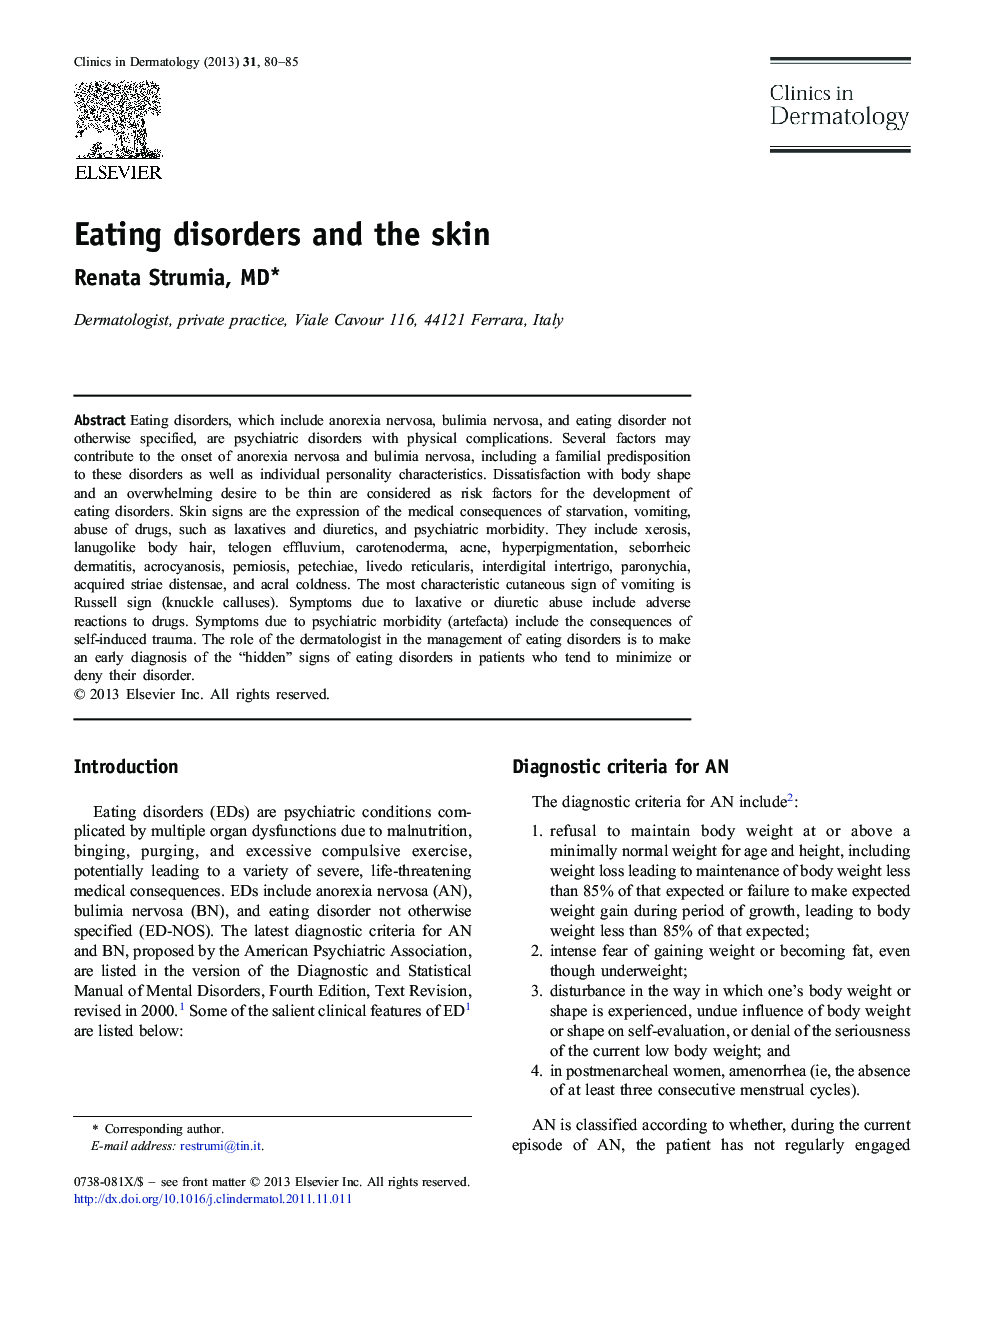 Eating disorders and the skin